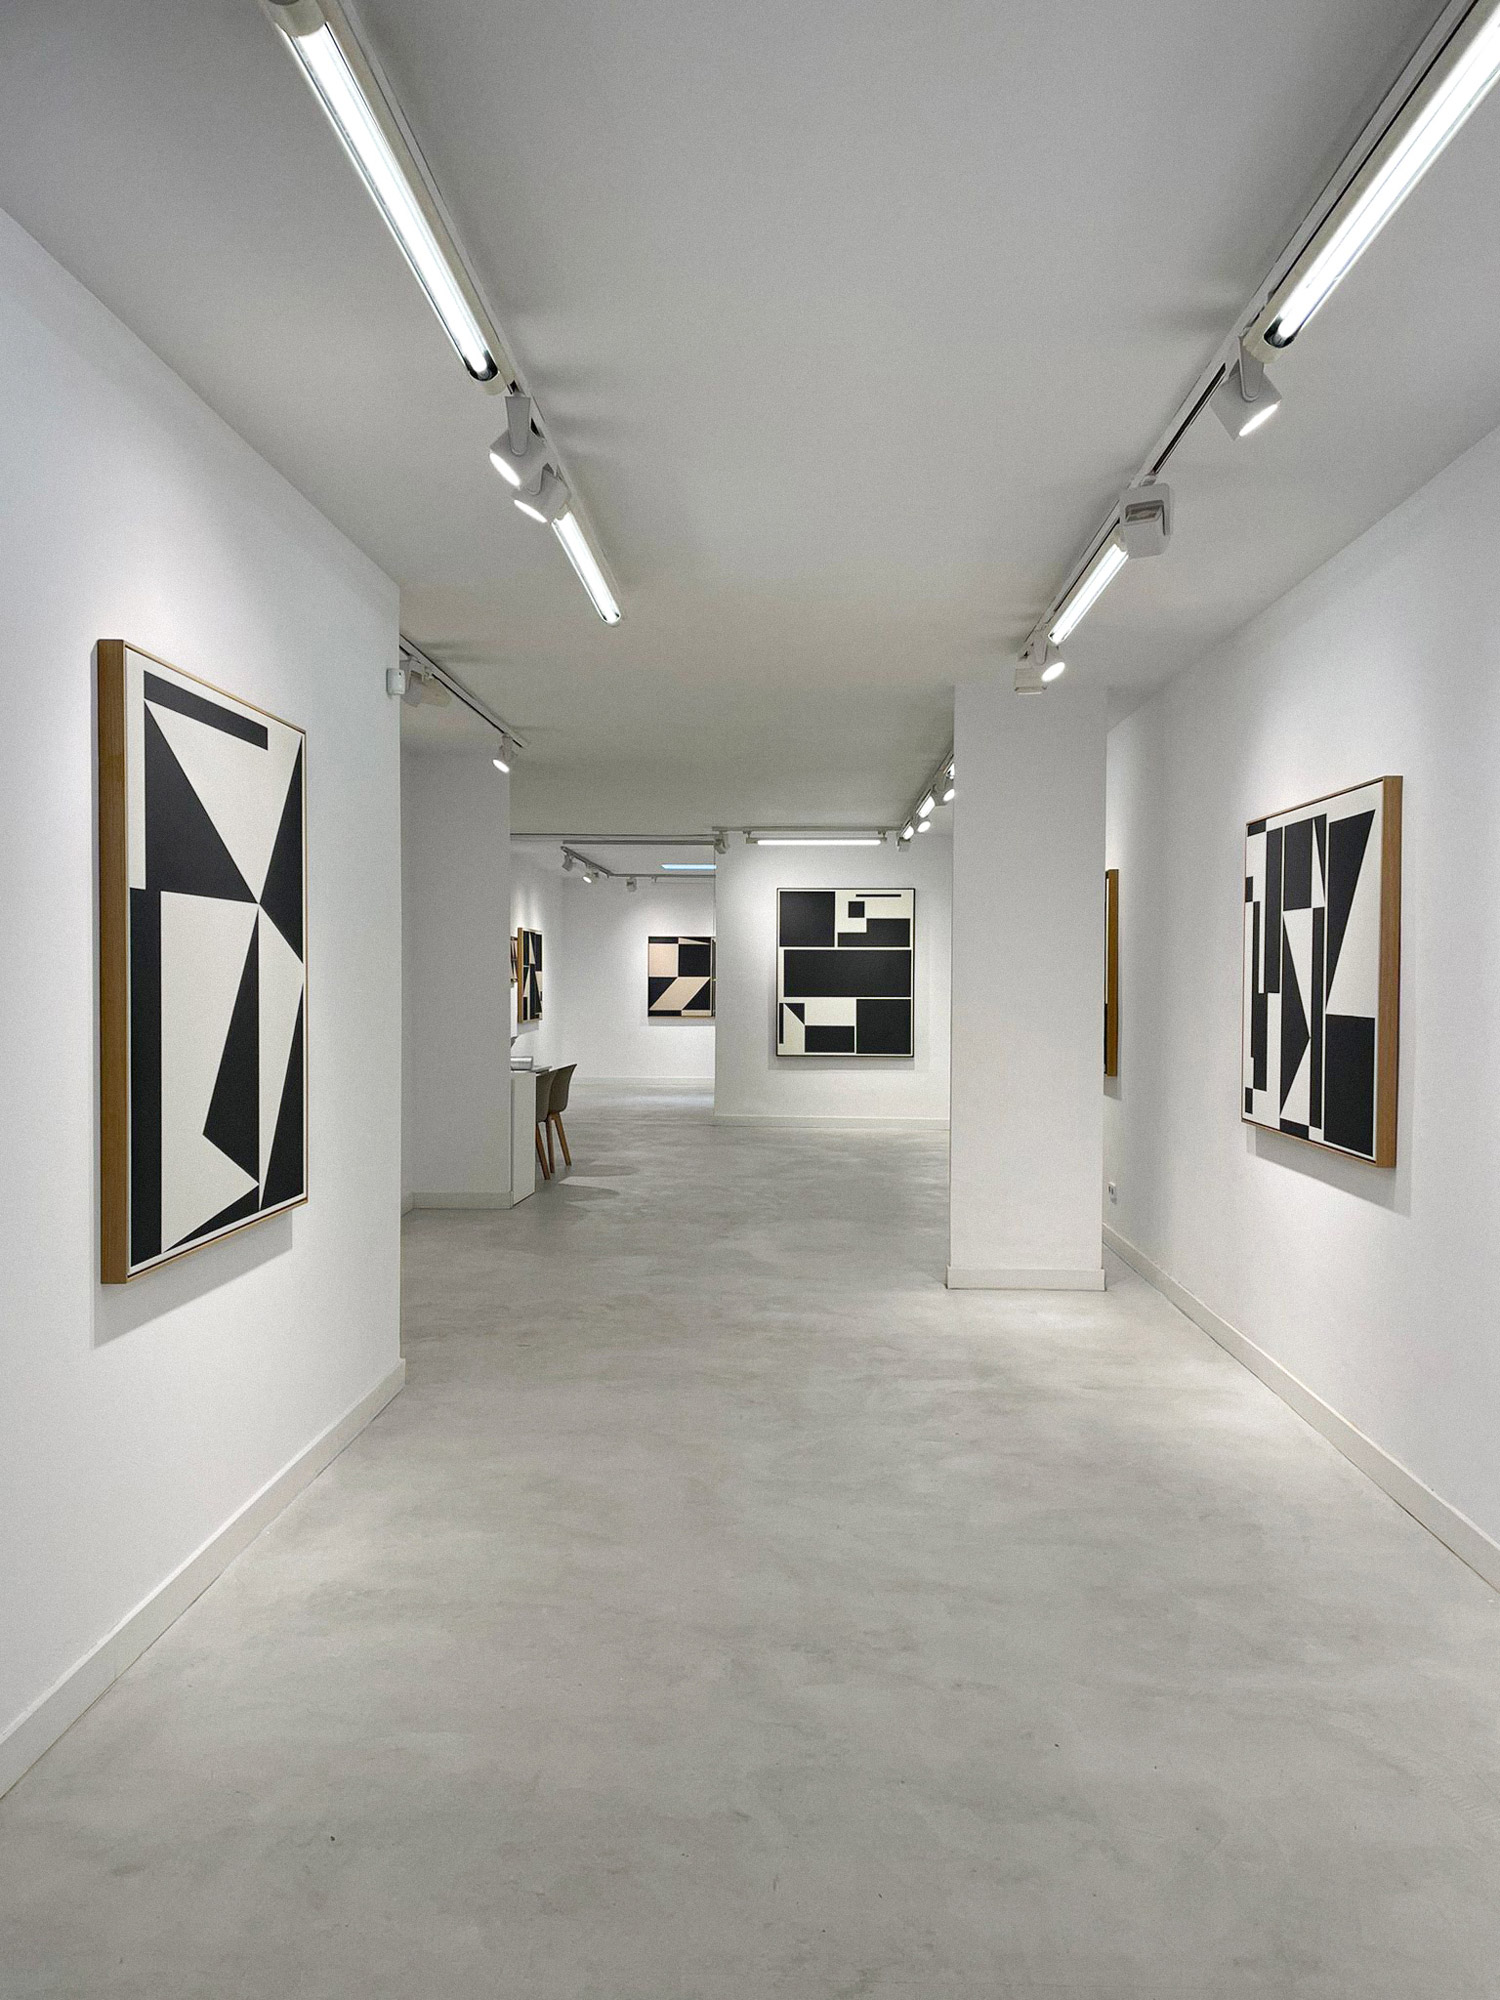 Exhibition View of Carsten Beck: “Lines Interaction” at Víctor Lope Arte Contemporáneo © The Artist, Photography by Víctor Lope Arte Contemporáneo